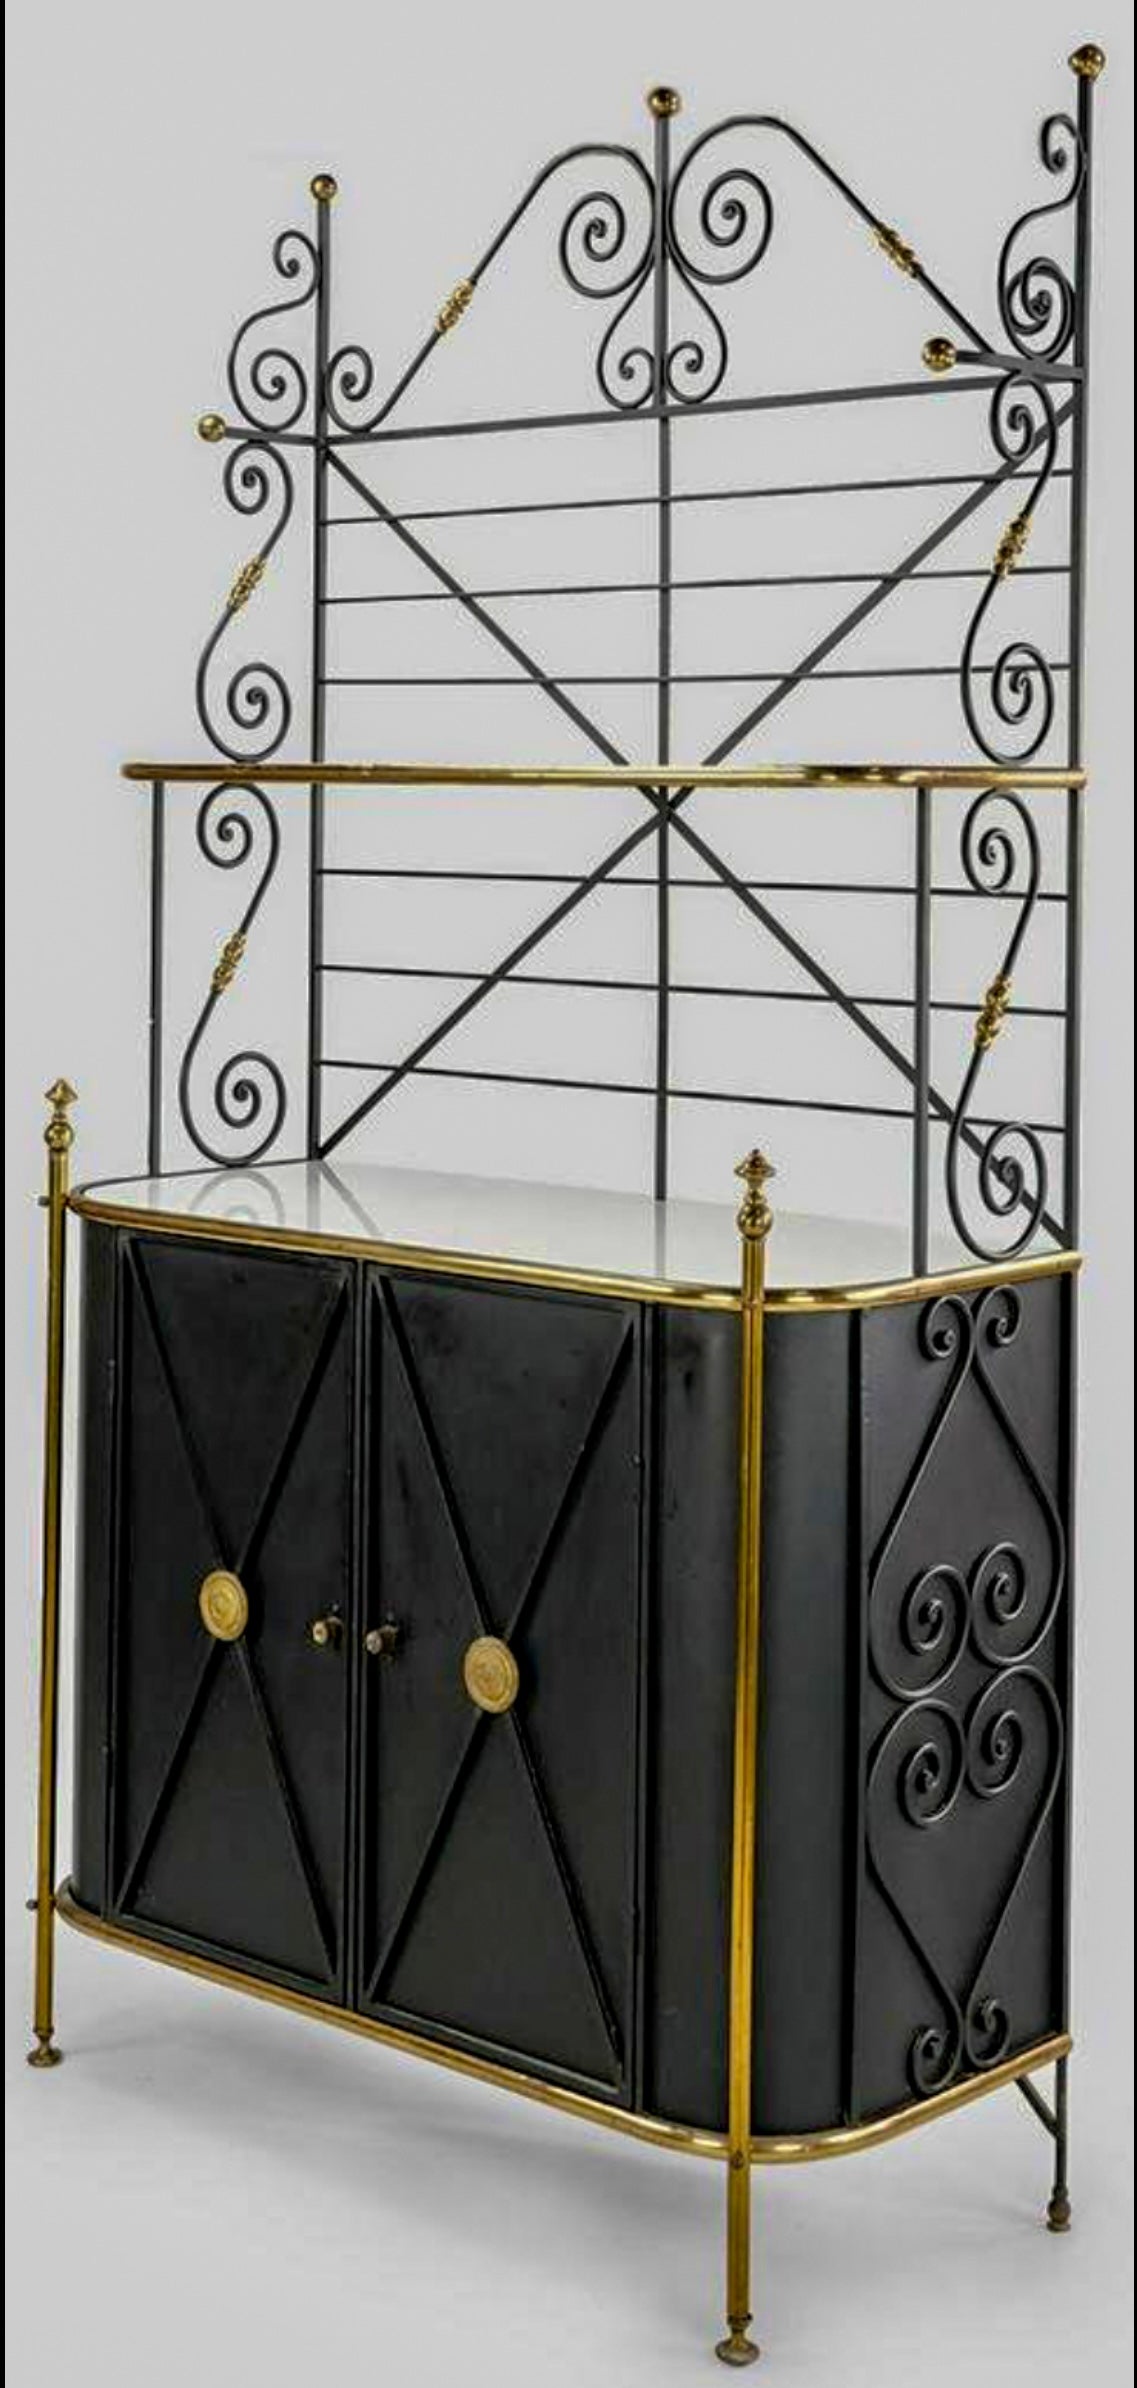 This is an exceptional French baker’s rack with original milk glass shelves. It would make a killer bar too. A versatile piece to be sure. It is a combination of aluminum, iron, and brass, and it is very heavy construction. It includes the key for